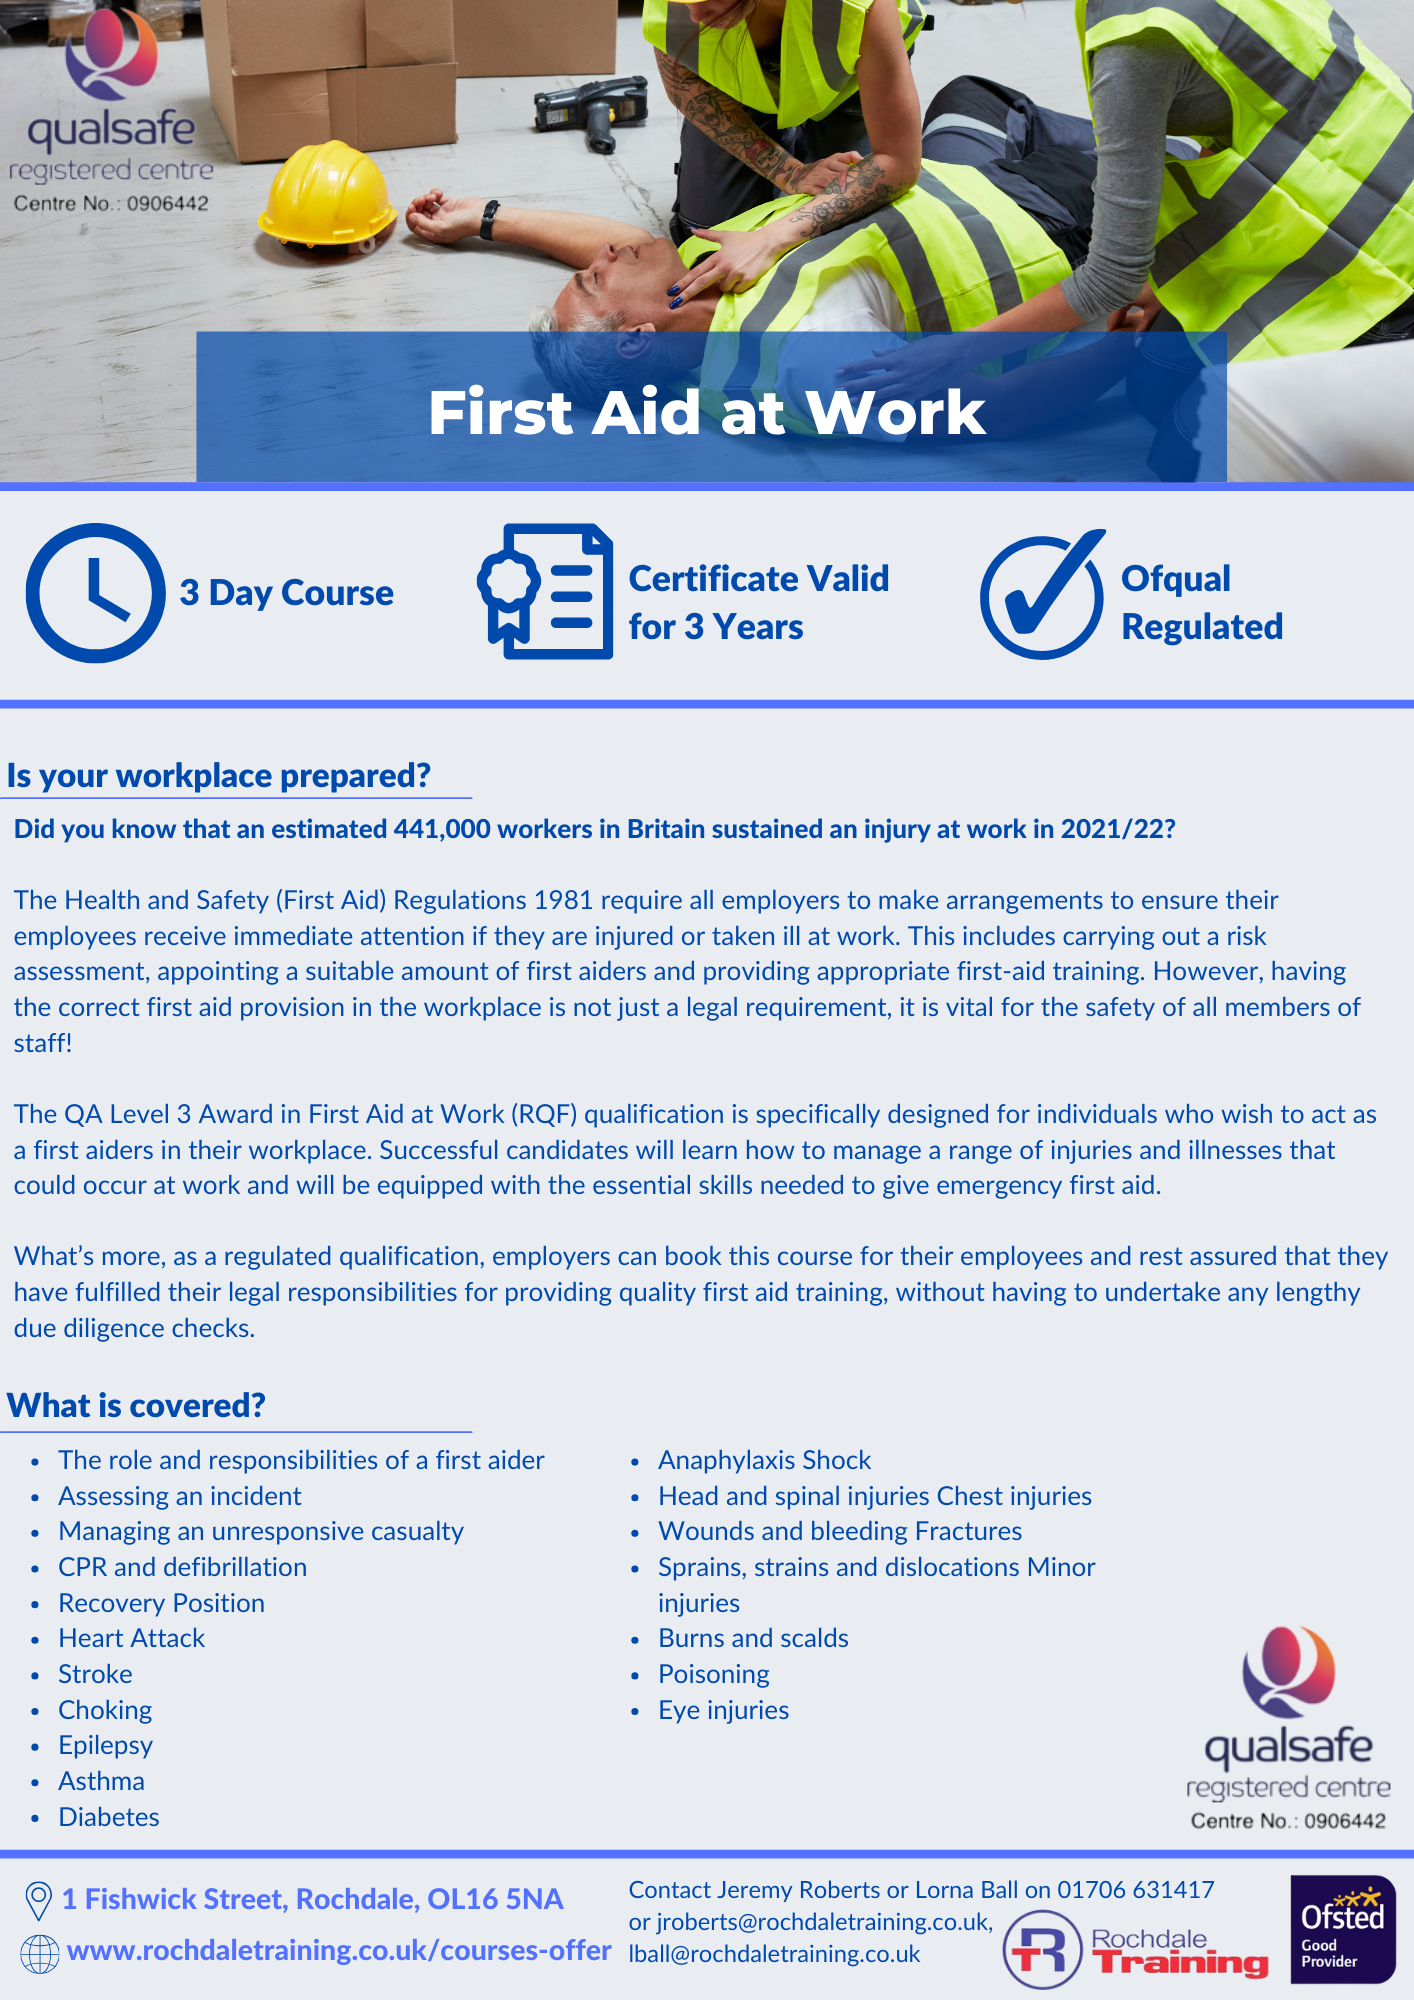 Qualsafe First Aid at Work 